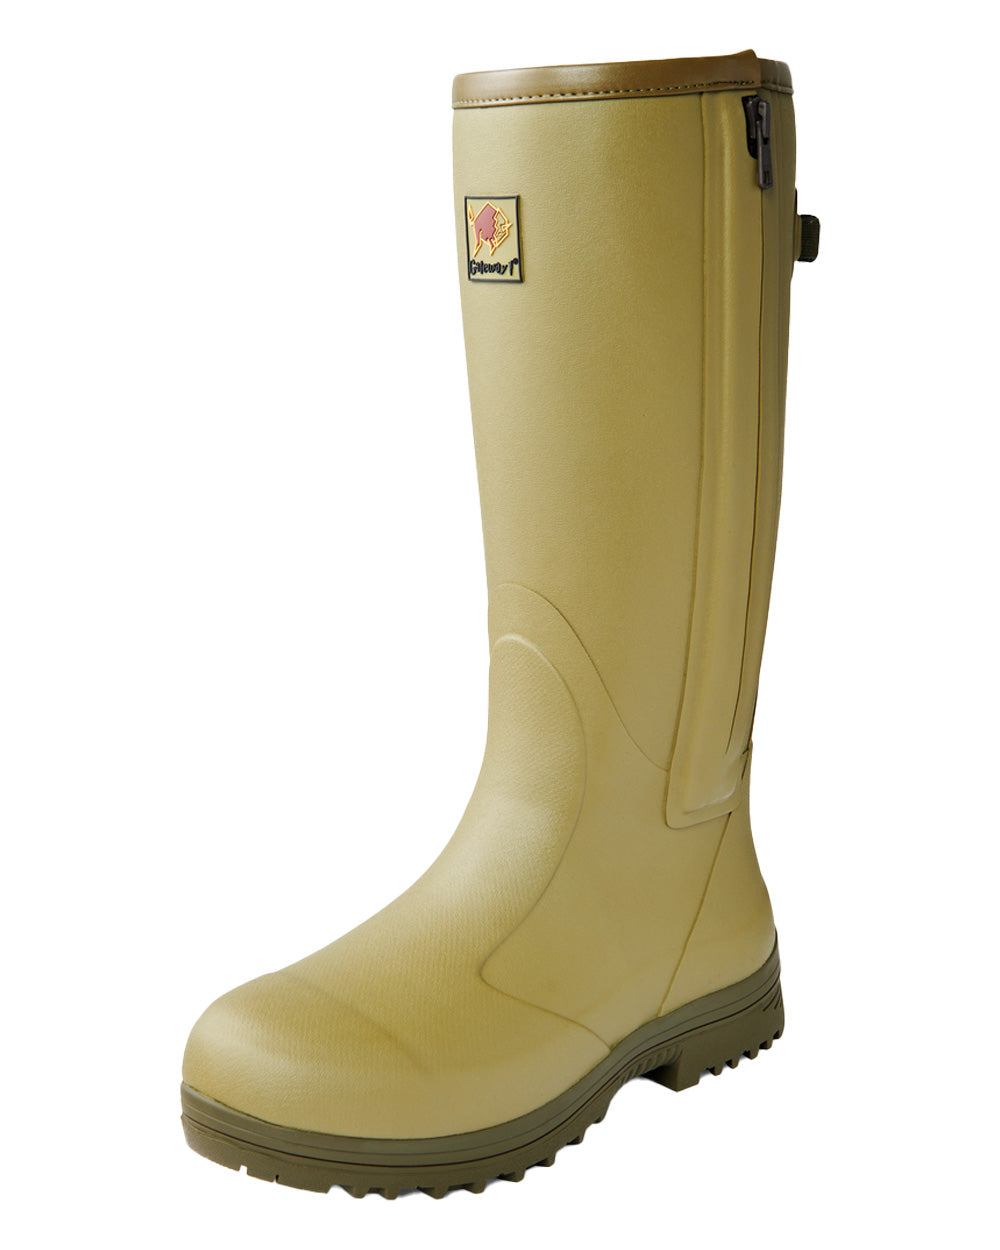 Cedar Olive coloured Gateway1 Pheasant Game 18&quot; 5mm Size-Zip Wellingtons on White background 